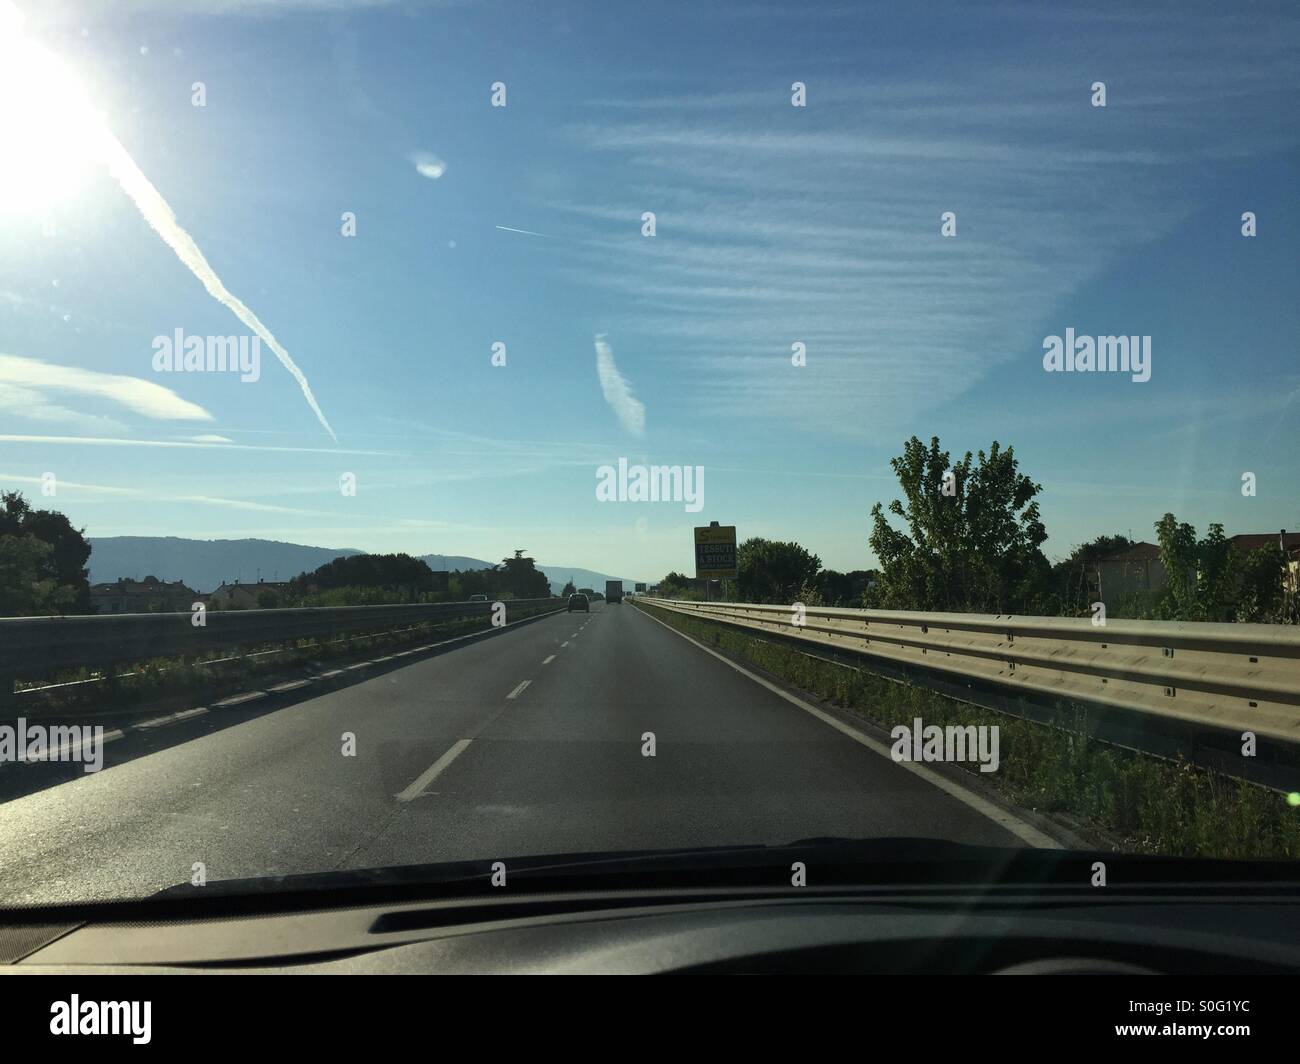 Two wakes of aircraft in the sky between strange clouds while I'm driving Stock Photo